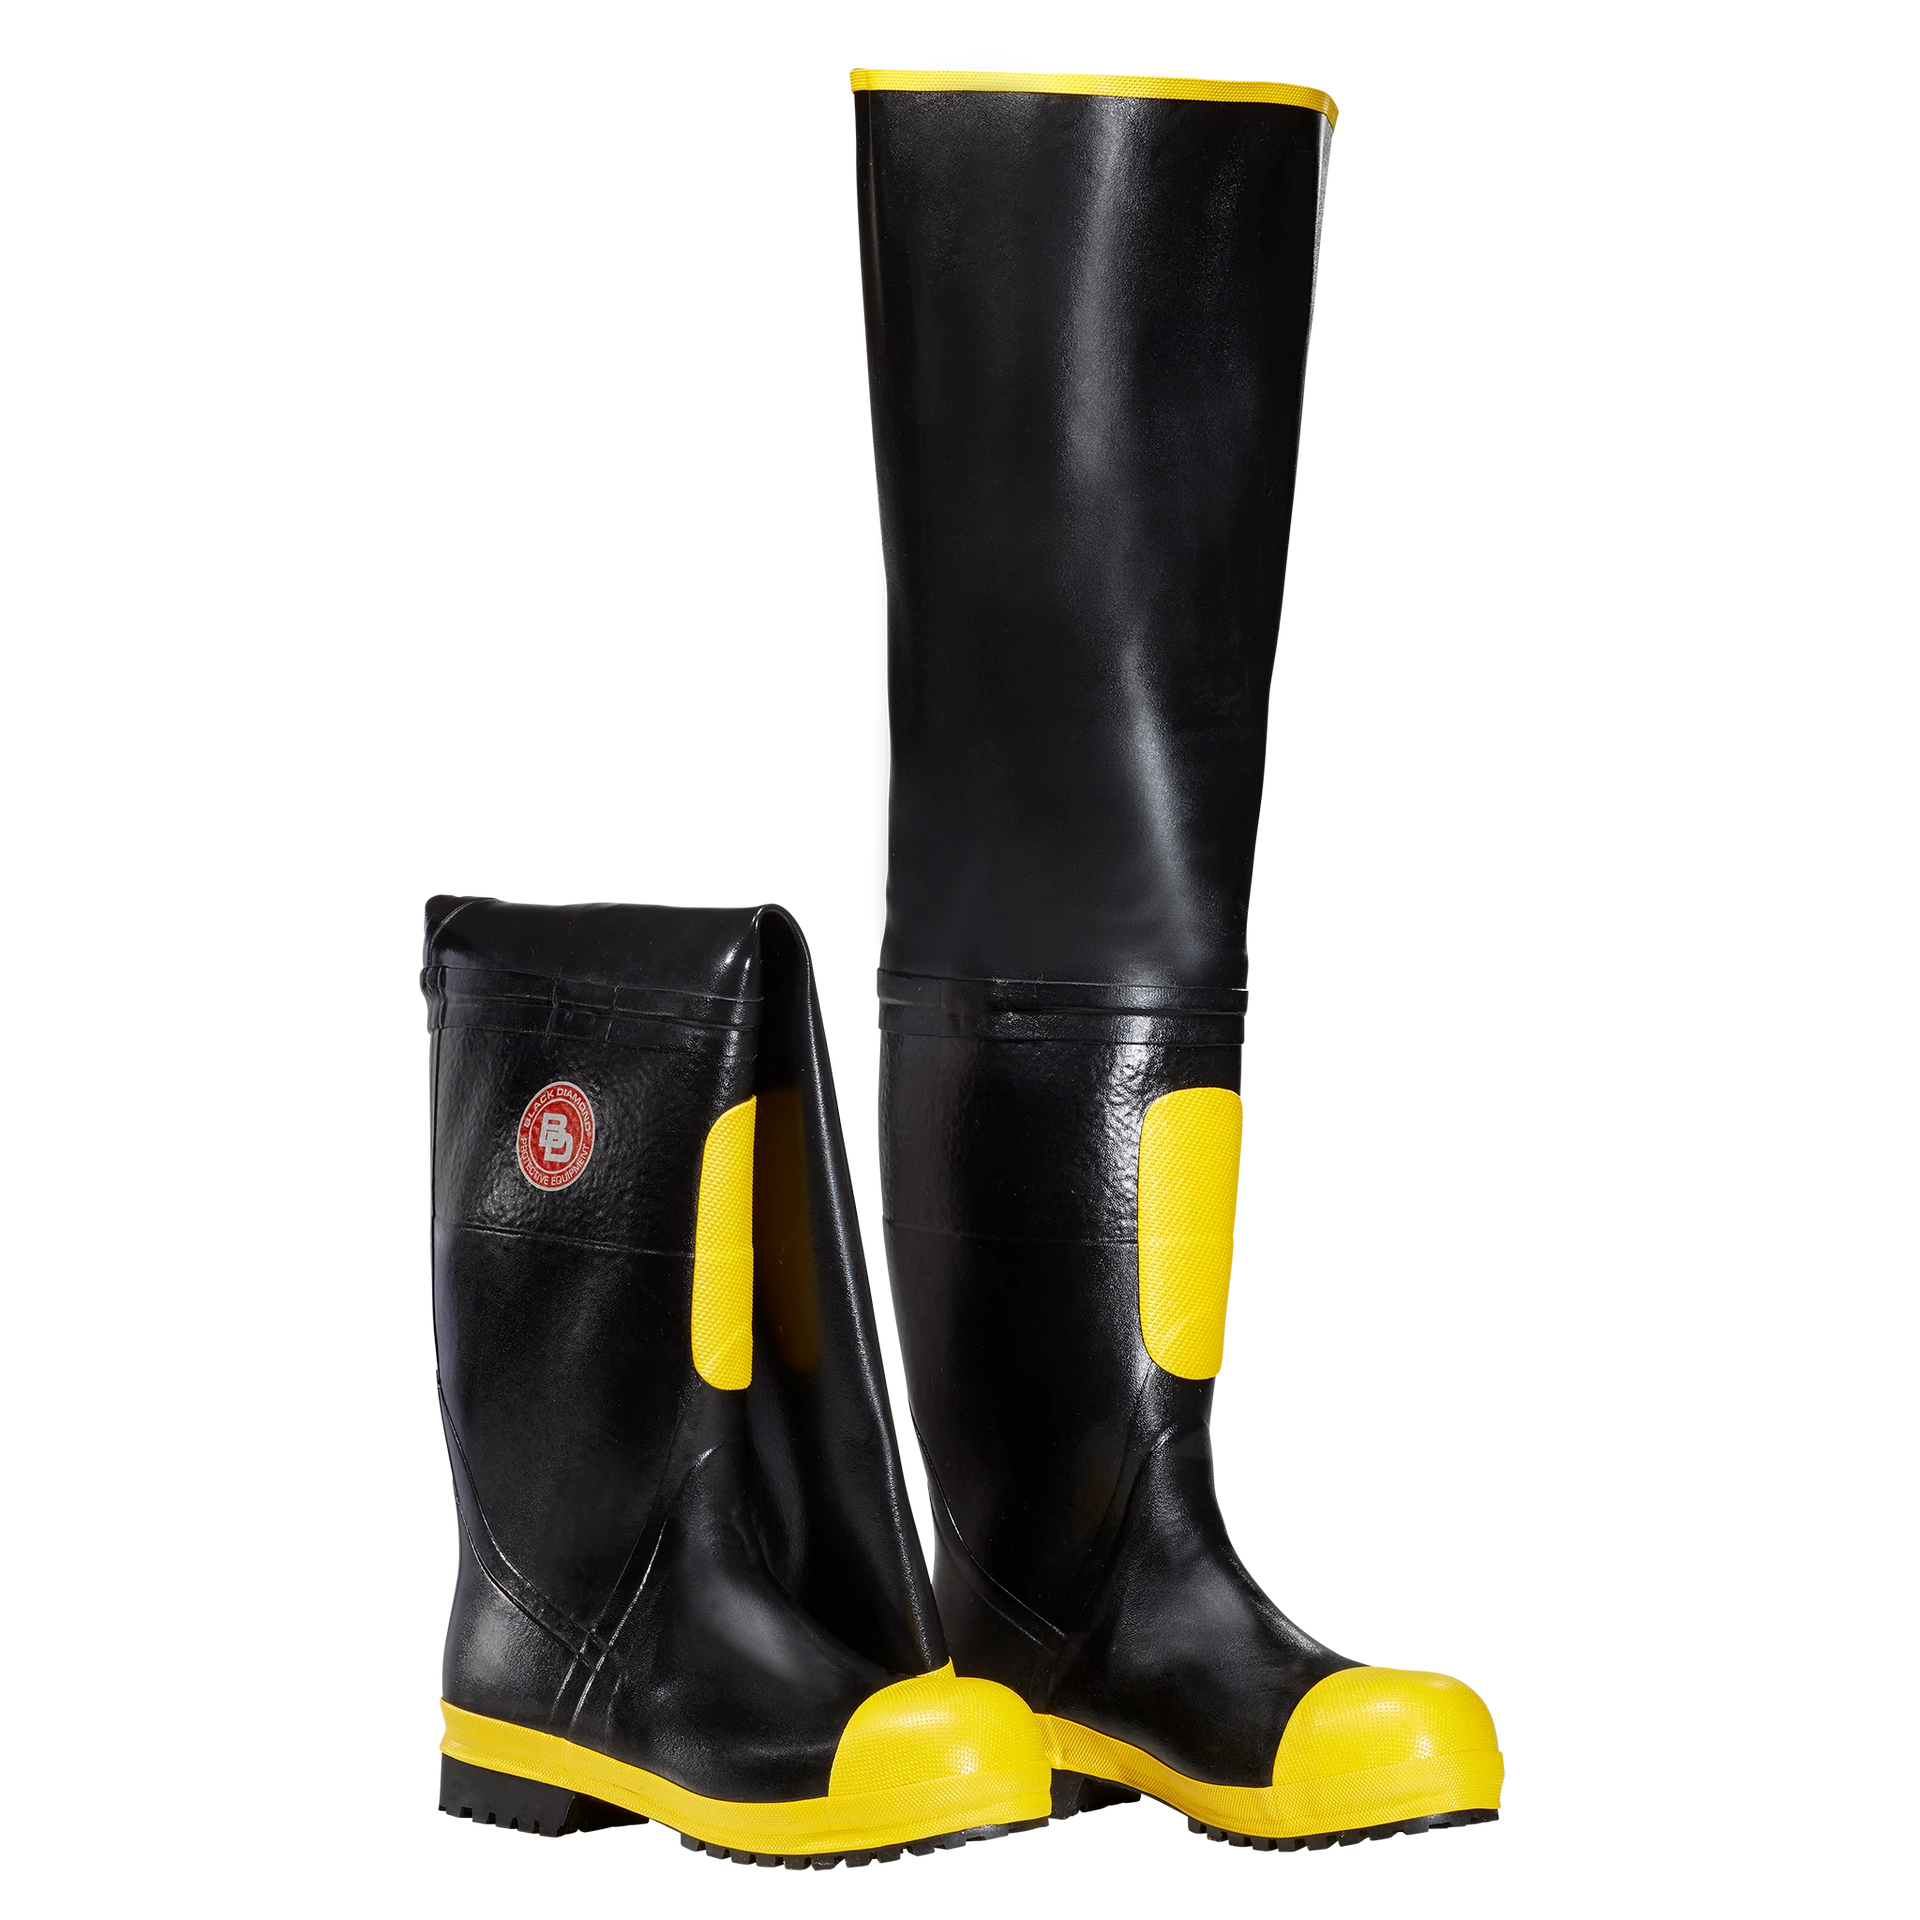 Black Diamond Rubber Hip Firefighter Boot, 31" | The Fire Center | Fuego Fire Center | Firefighter Gear | Not all rubber boots are made the same, Black Diamond Rubber Fire Boots provide maximum protection with all-day comfort and support. Our accurate fit design, large spacious steel toe and removable Ortholite® footbeds provide unmatched comfort making it the BEST DAMN RUBBER HIP BOOT. PERIOD.